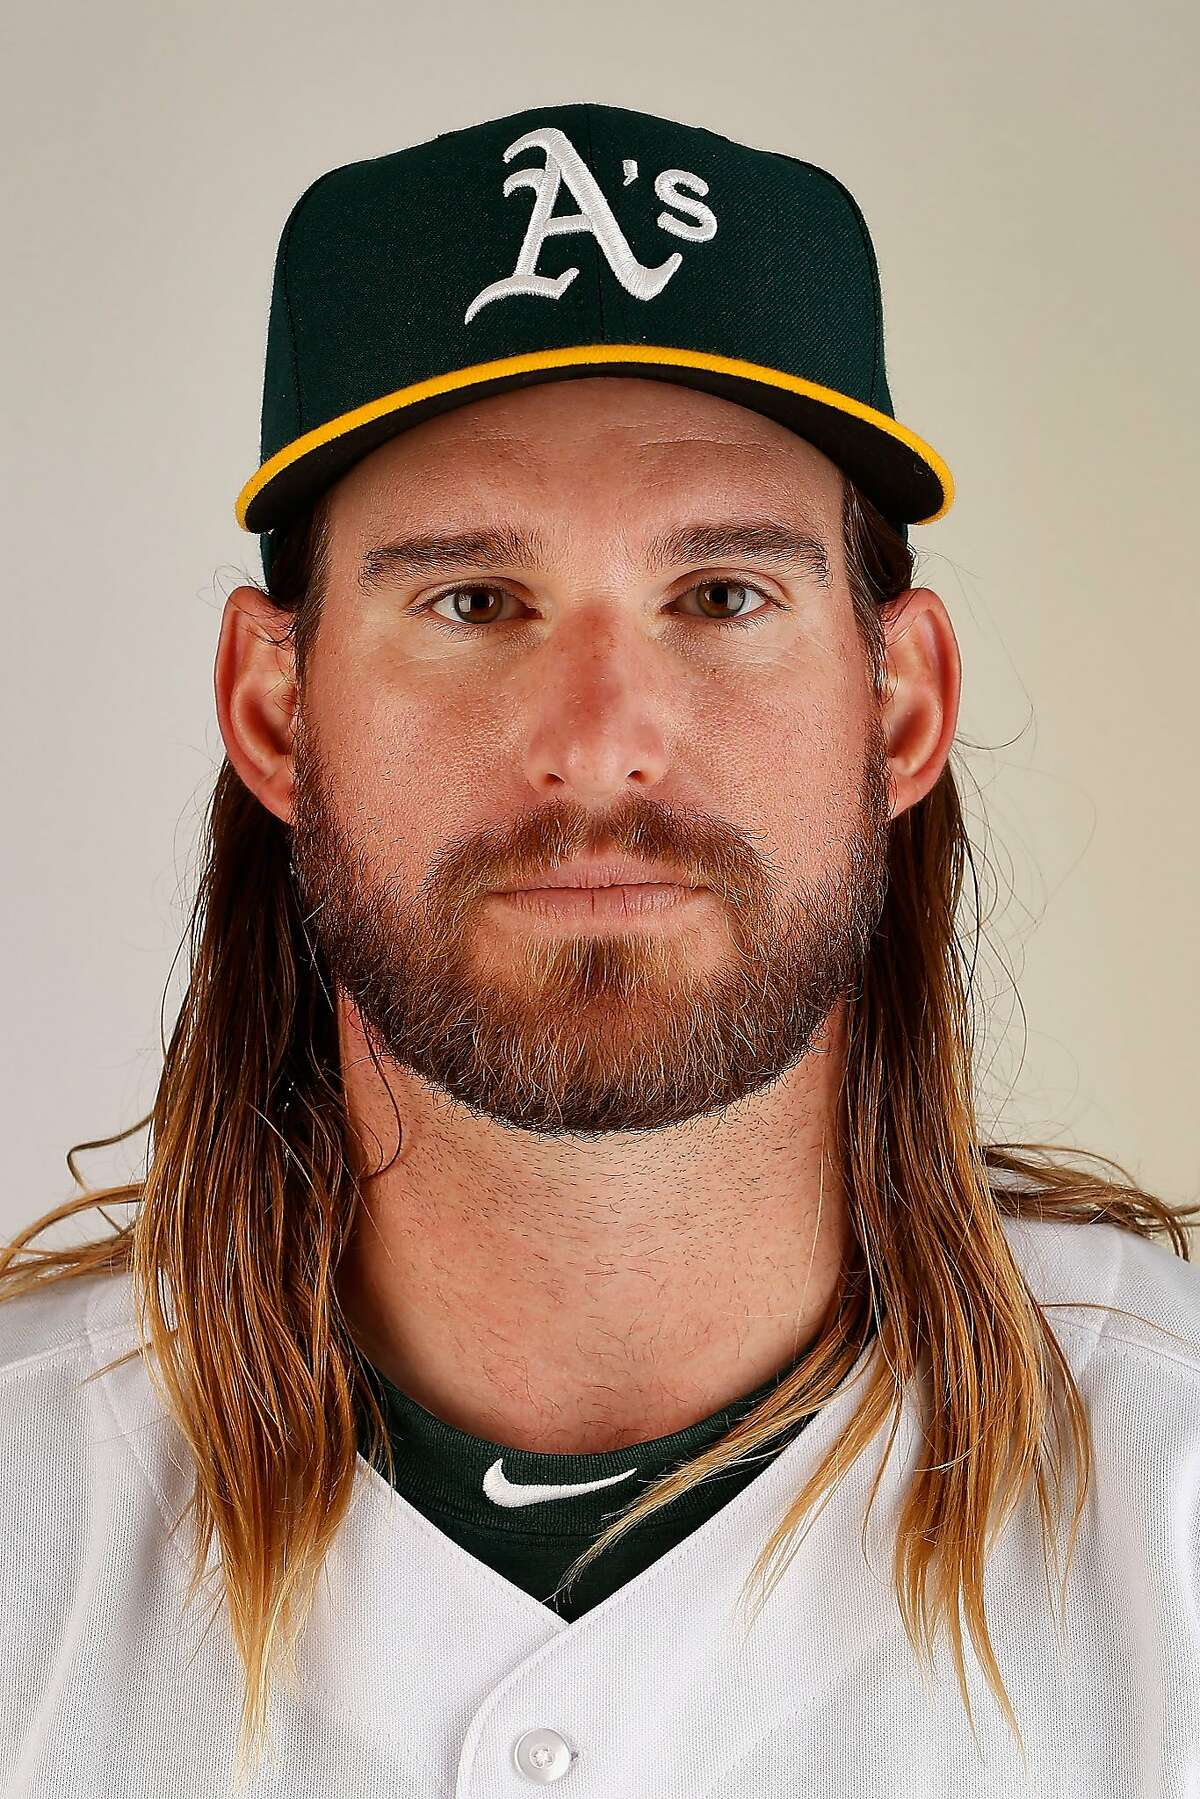 Bryan Anderson of the Oakland Athletics poses for a portrait during the spring training photo day at HoHoKam Stadium on February 29, 2016 in Mesa, Arizona.